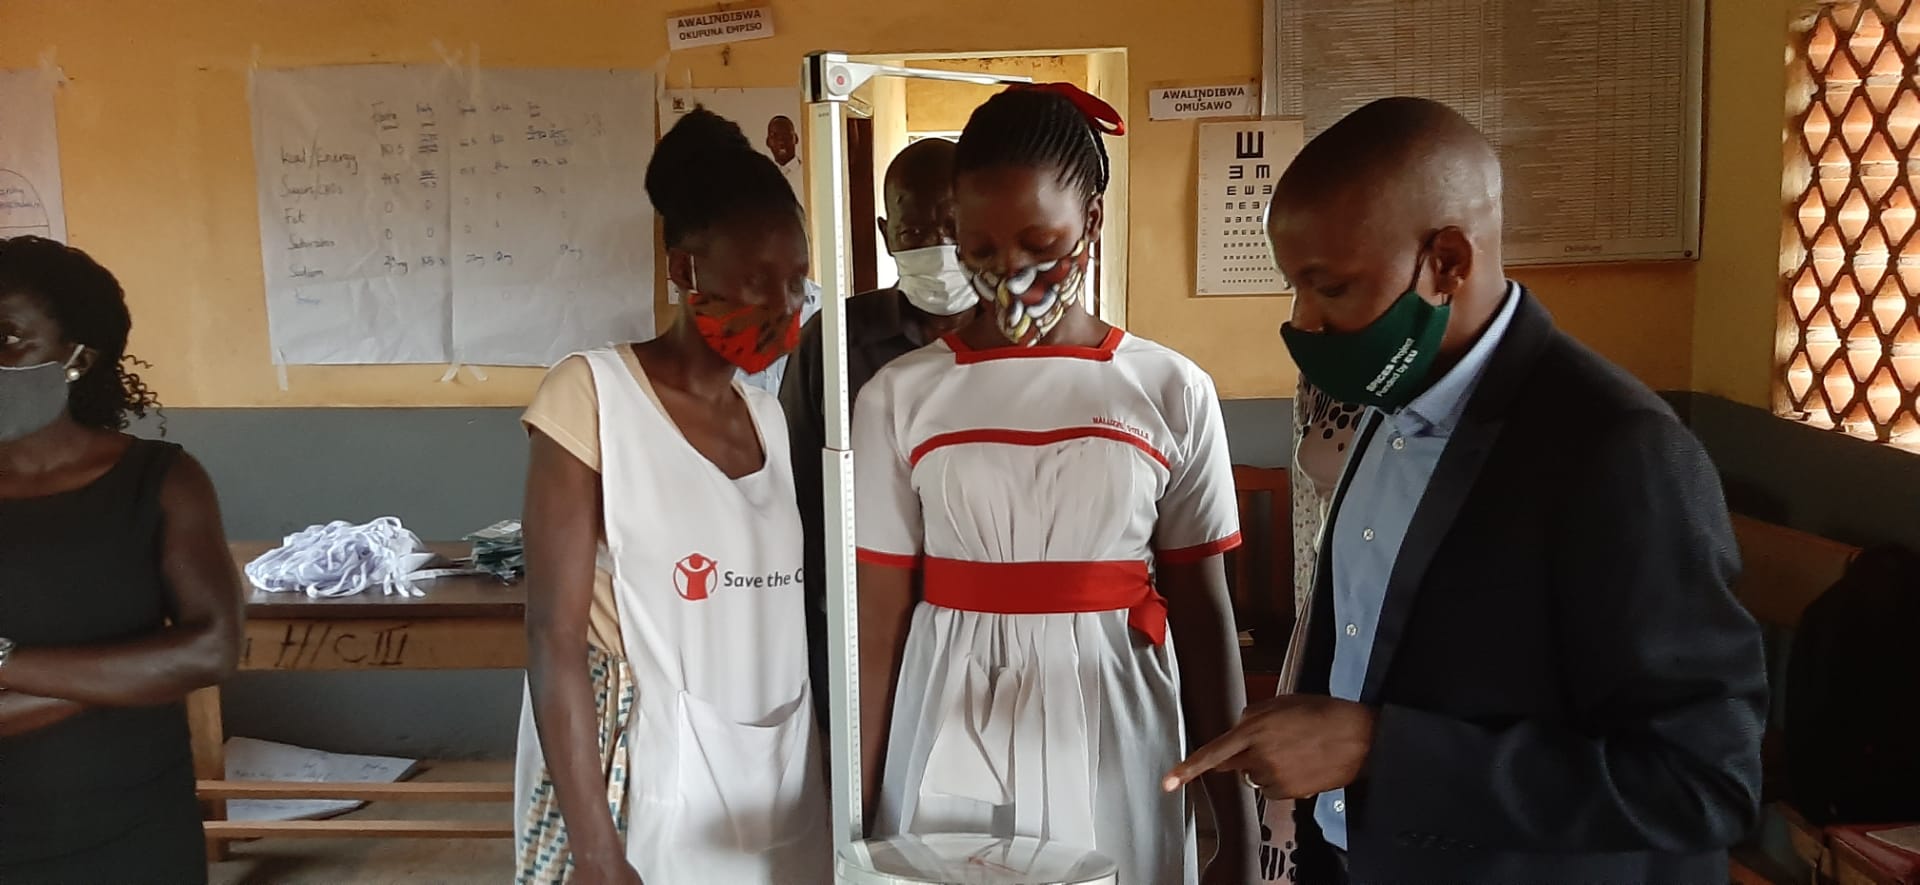 Dr. Geofrey Musinguzi, the SPICES director demonstrates to trainees at Kasawo HCIII on how to operate a measuring rod.